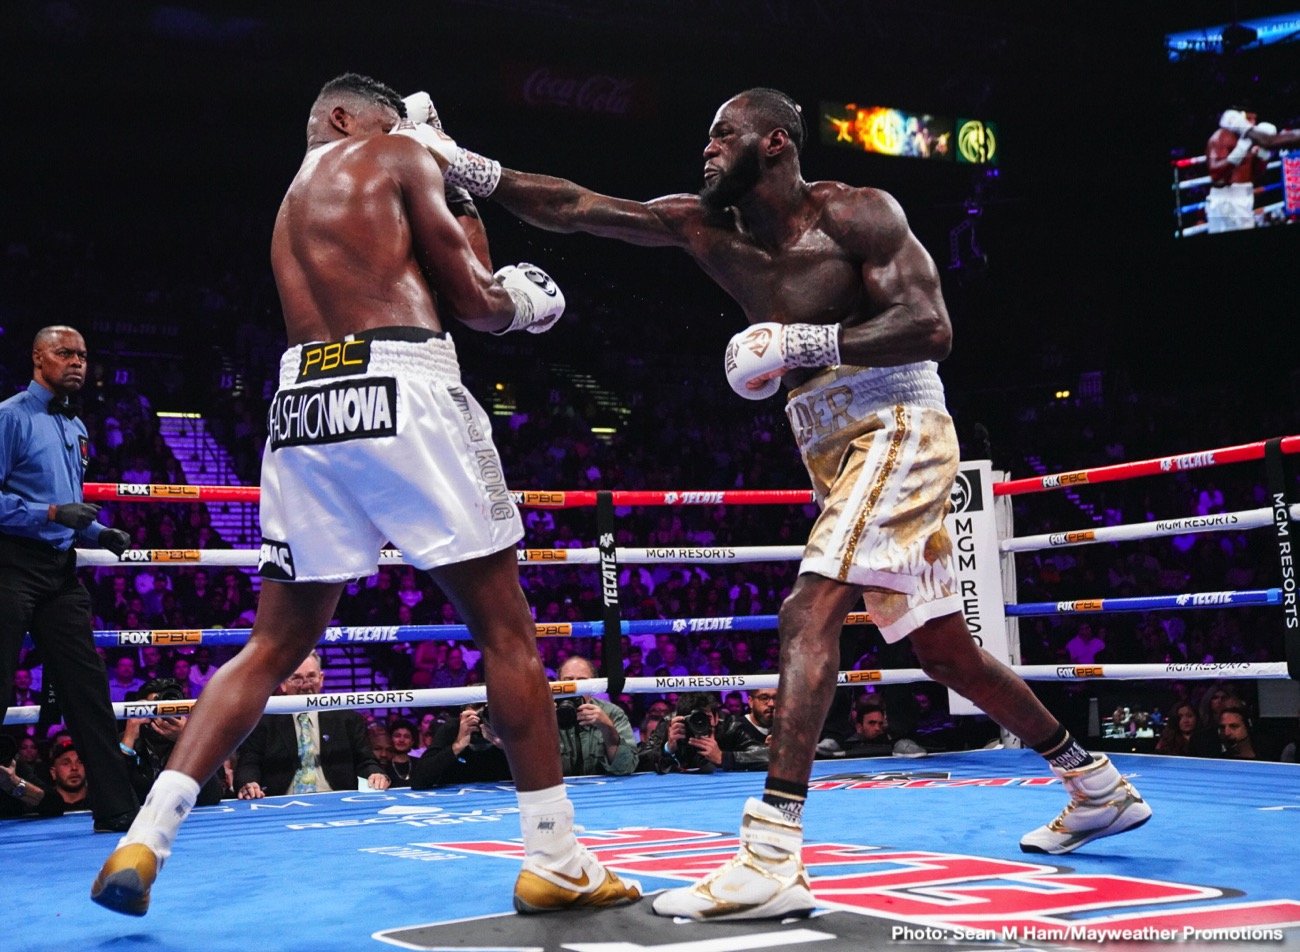 Anthony Joshua Vs. Deontay Wilder Who's The Favorite? - Boxing News 24